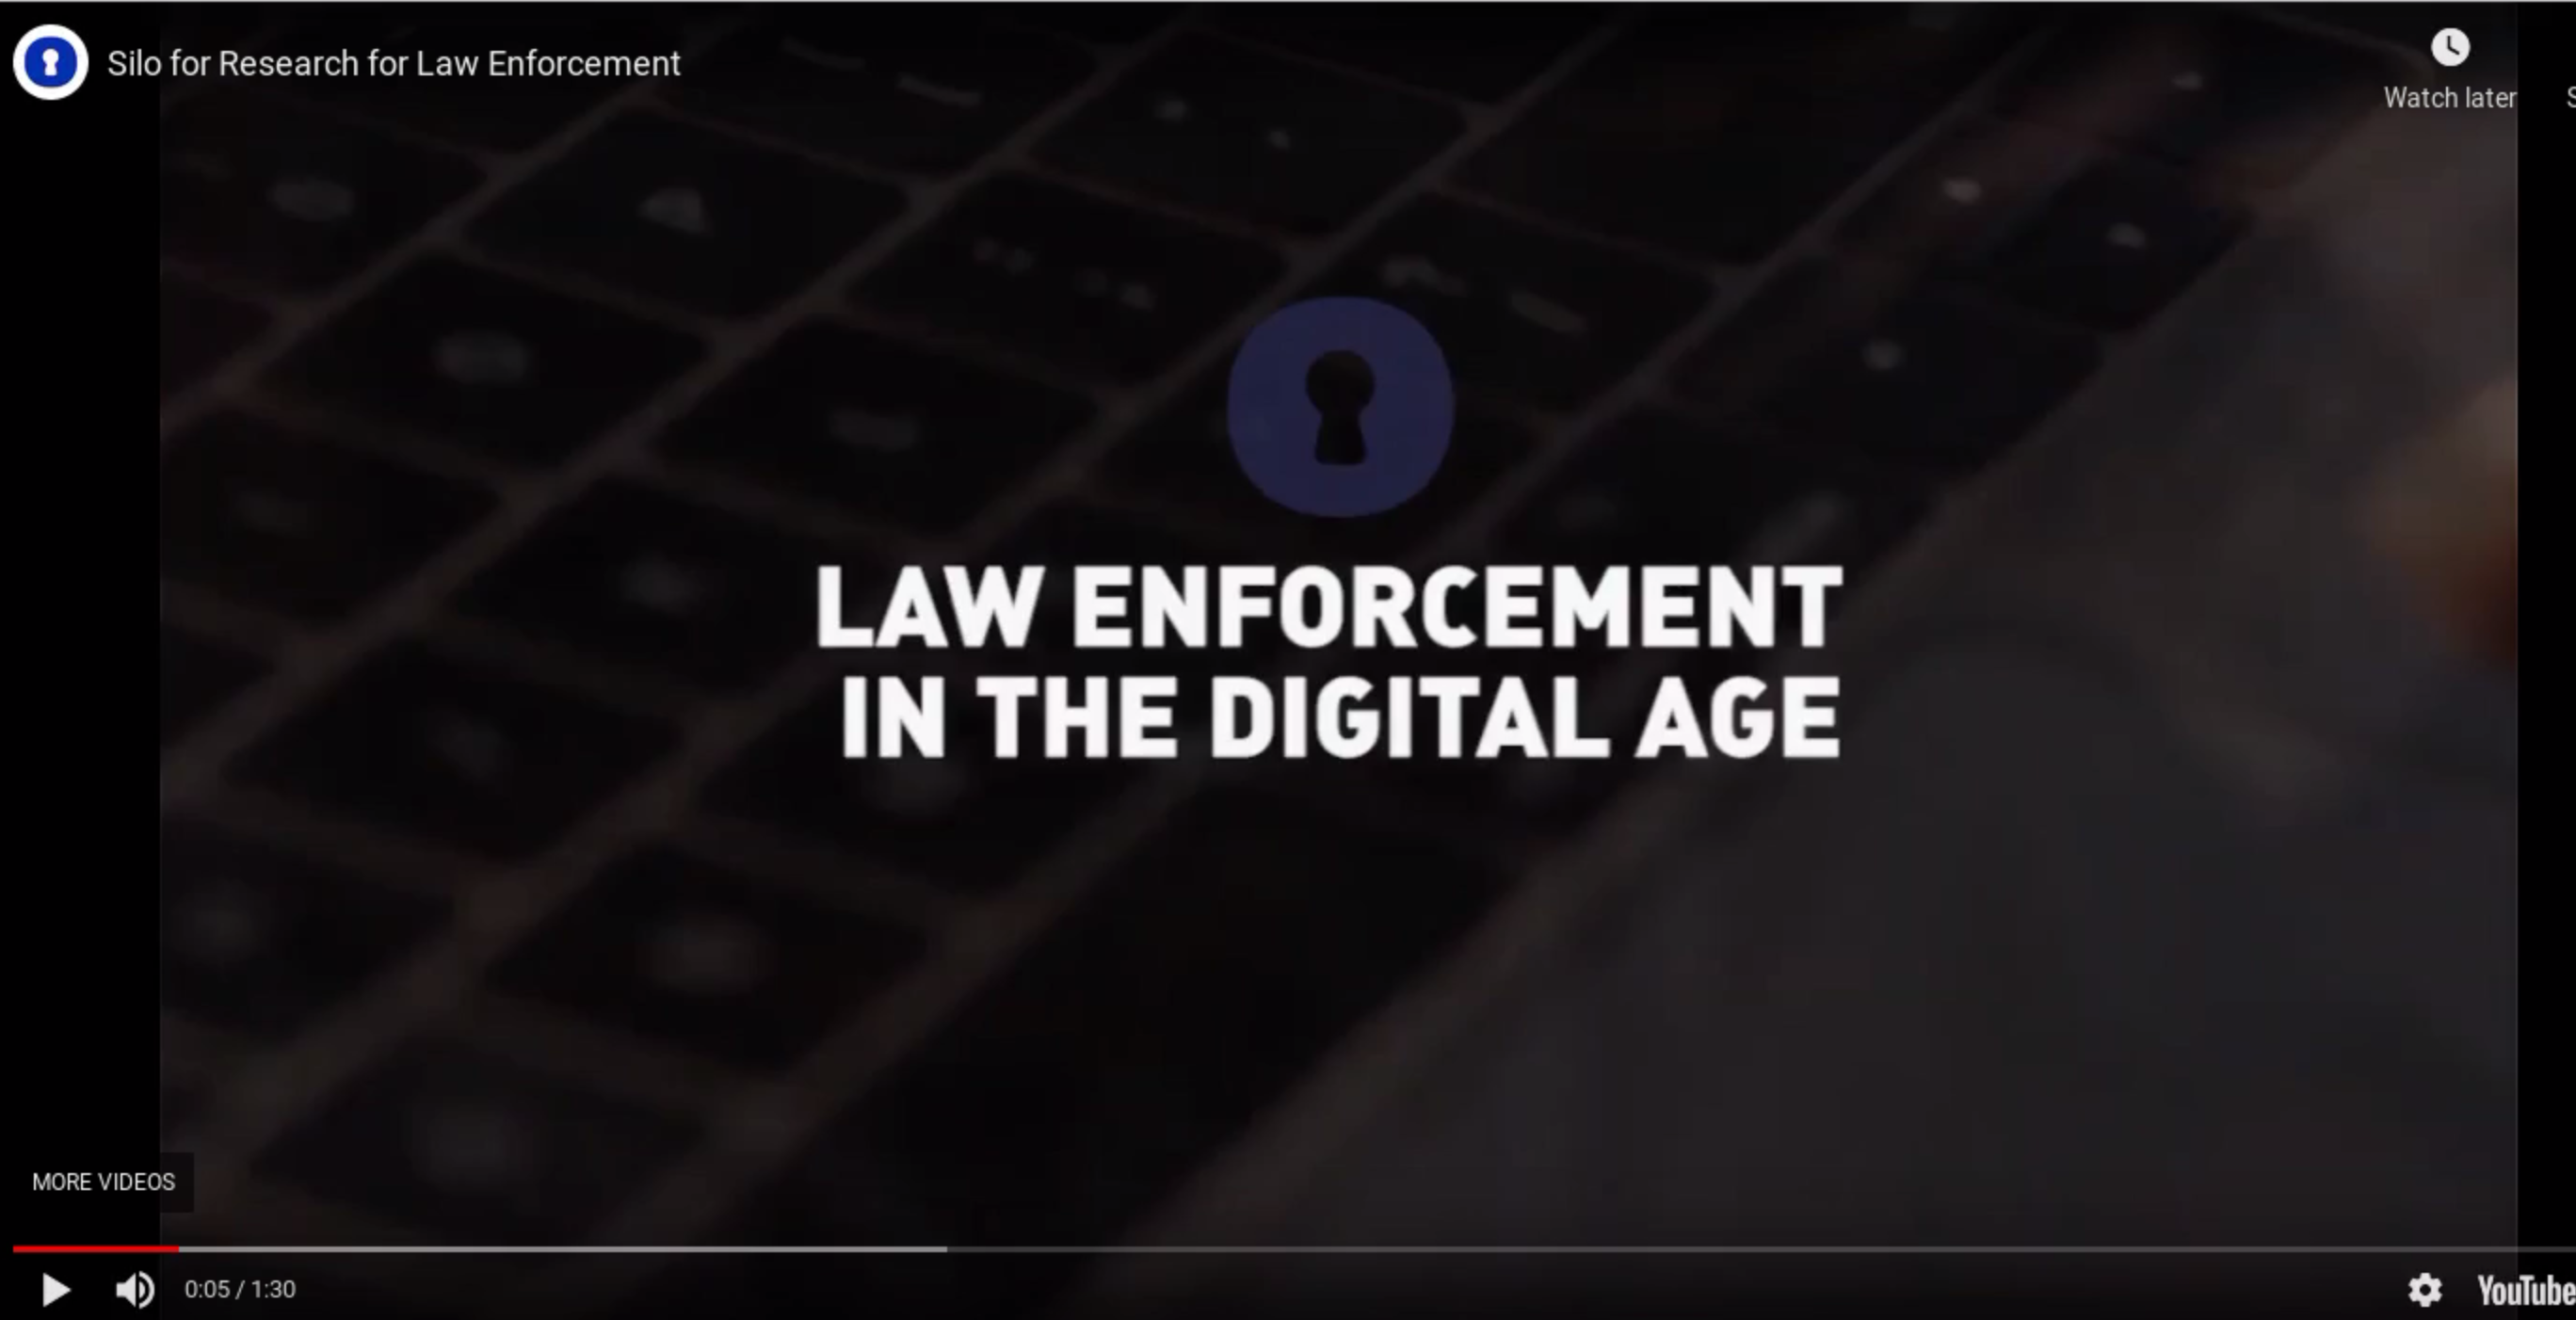 Open video screen for law enforcement in the digital age